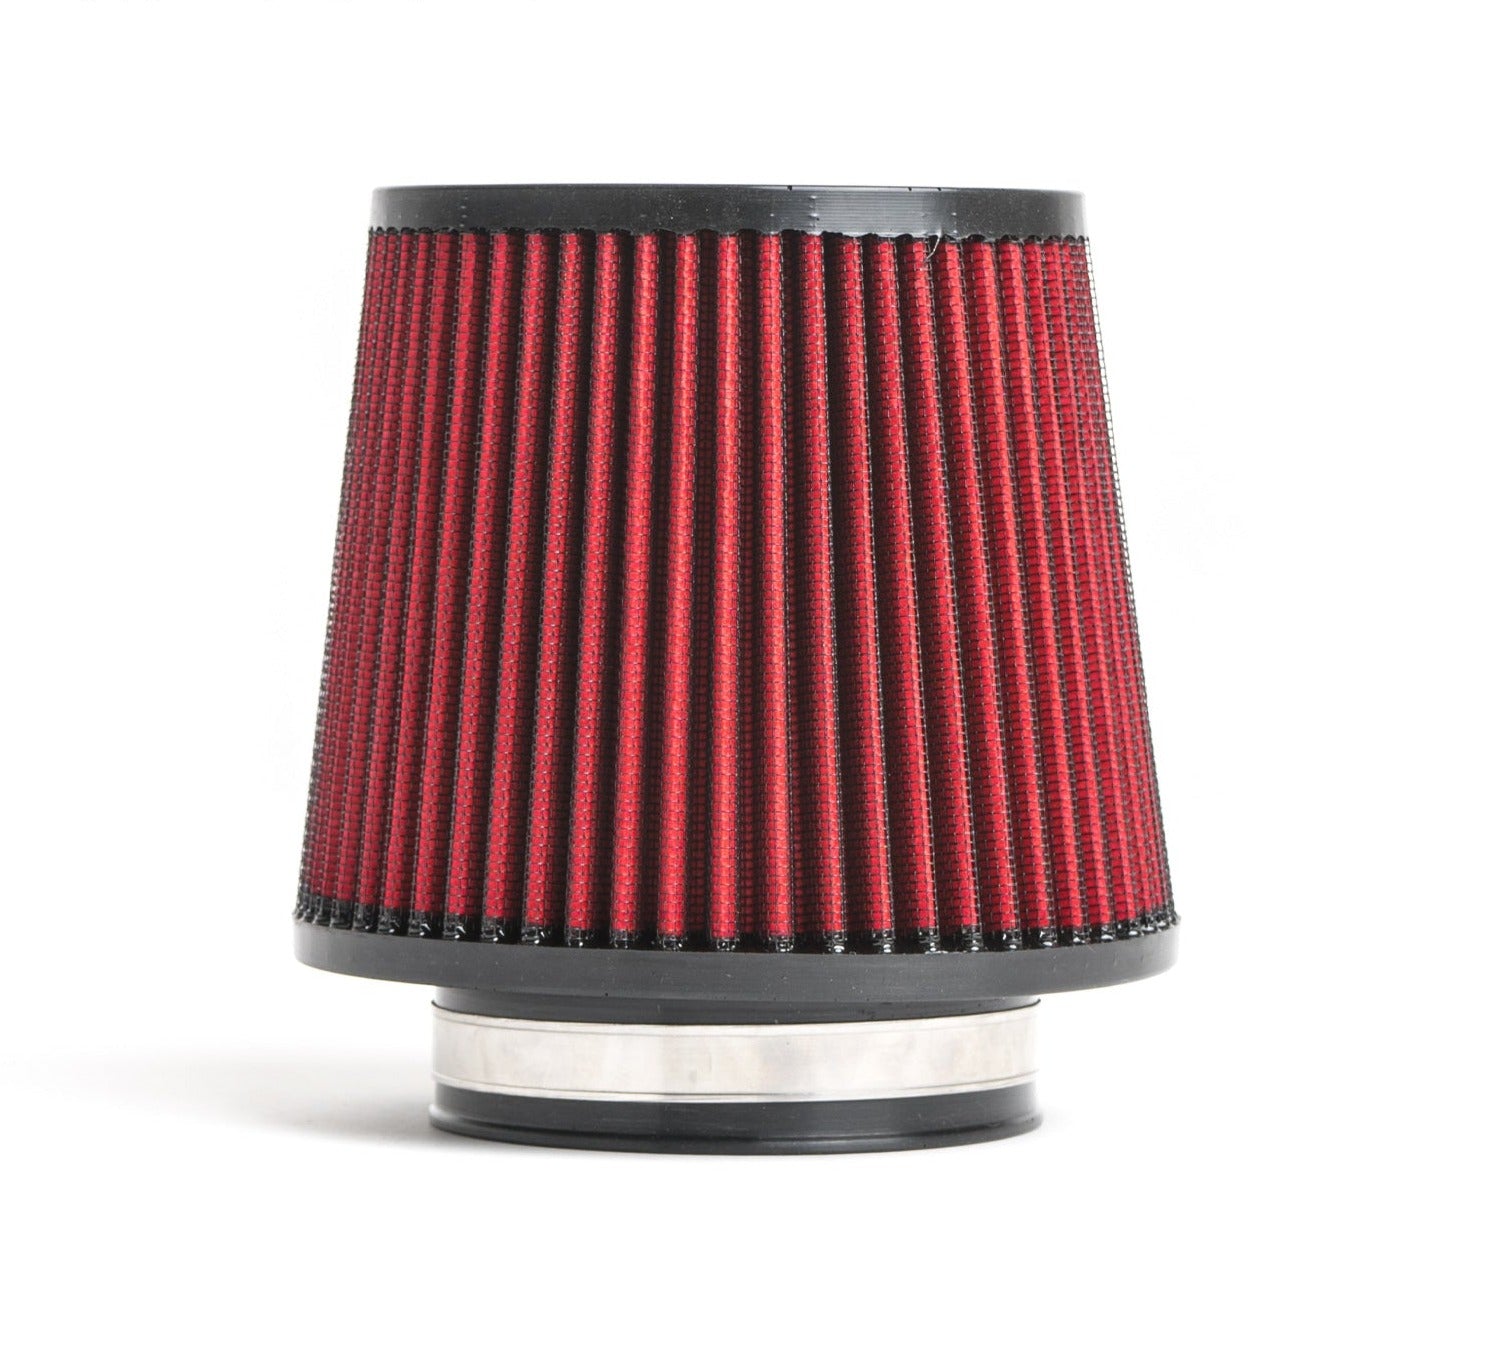 CTS Turbo 3.5" Air Filter For CTS-IT-270/270R/290/300/180